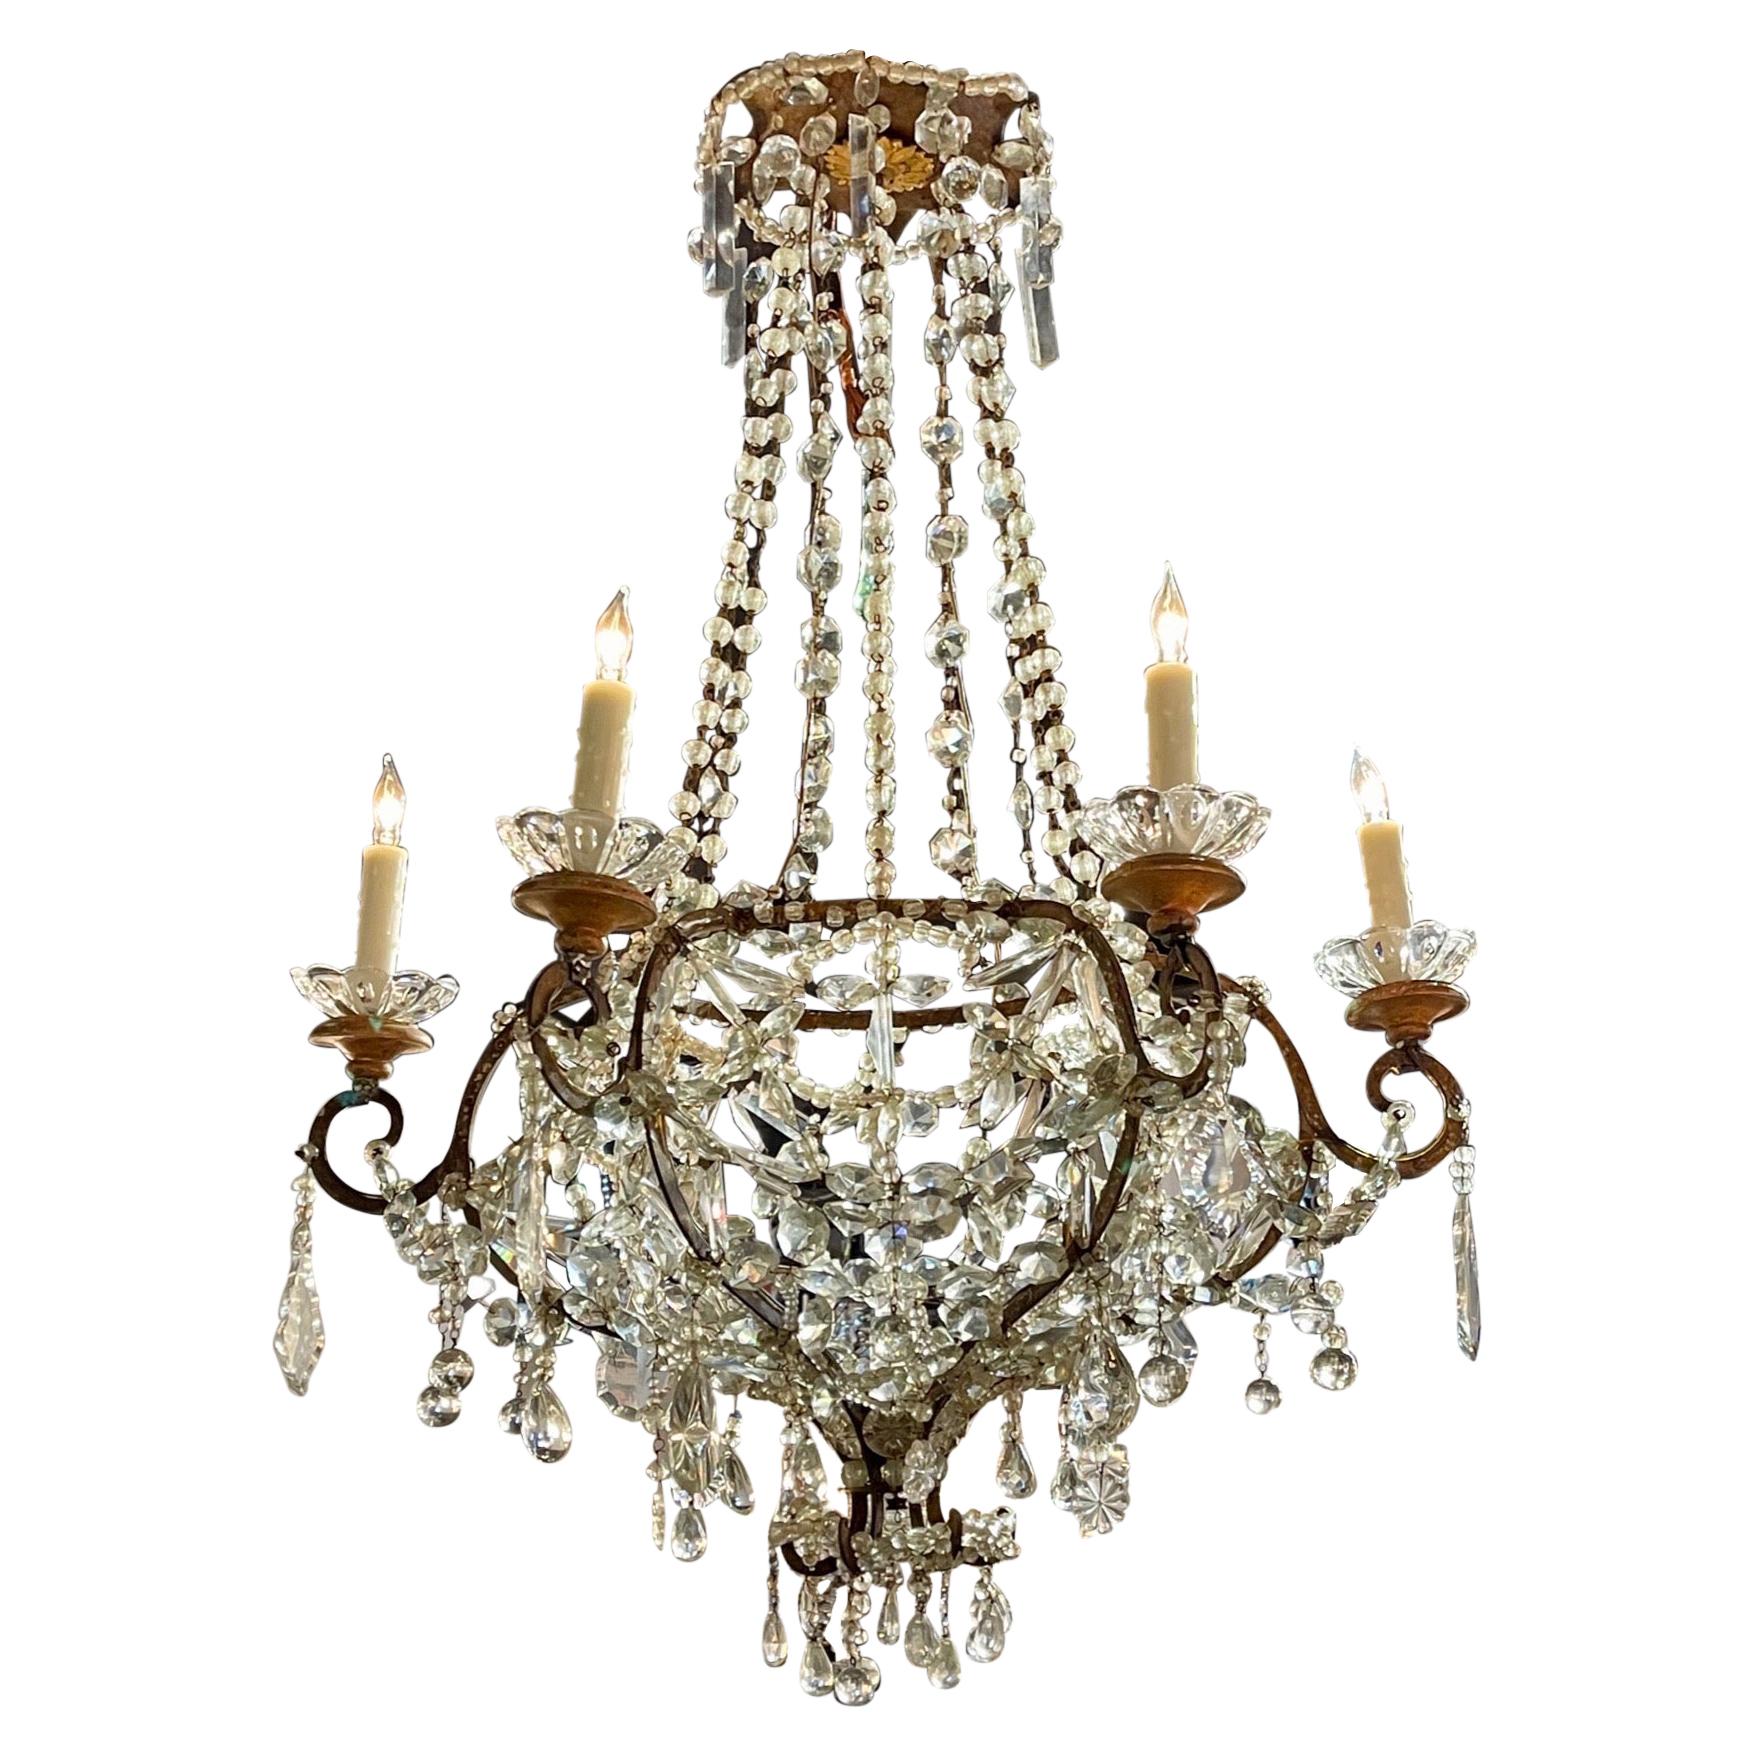 18th Century Italian Glass and Crystal Basket Form Chandelier For Sale